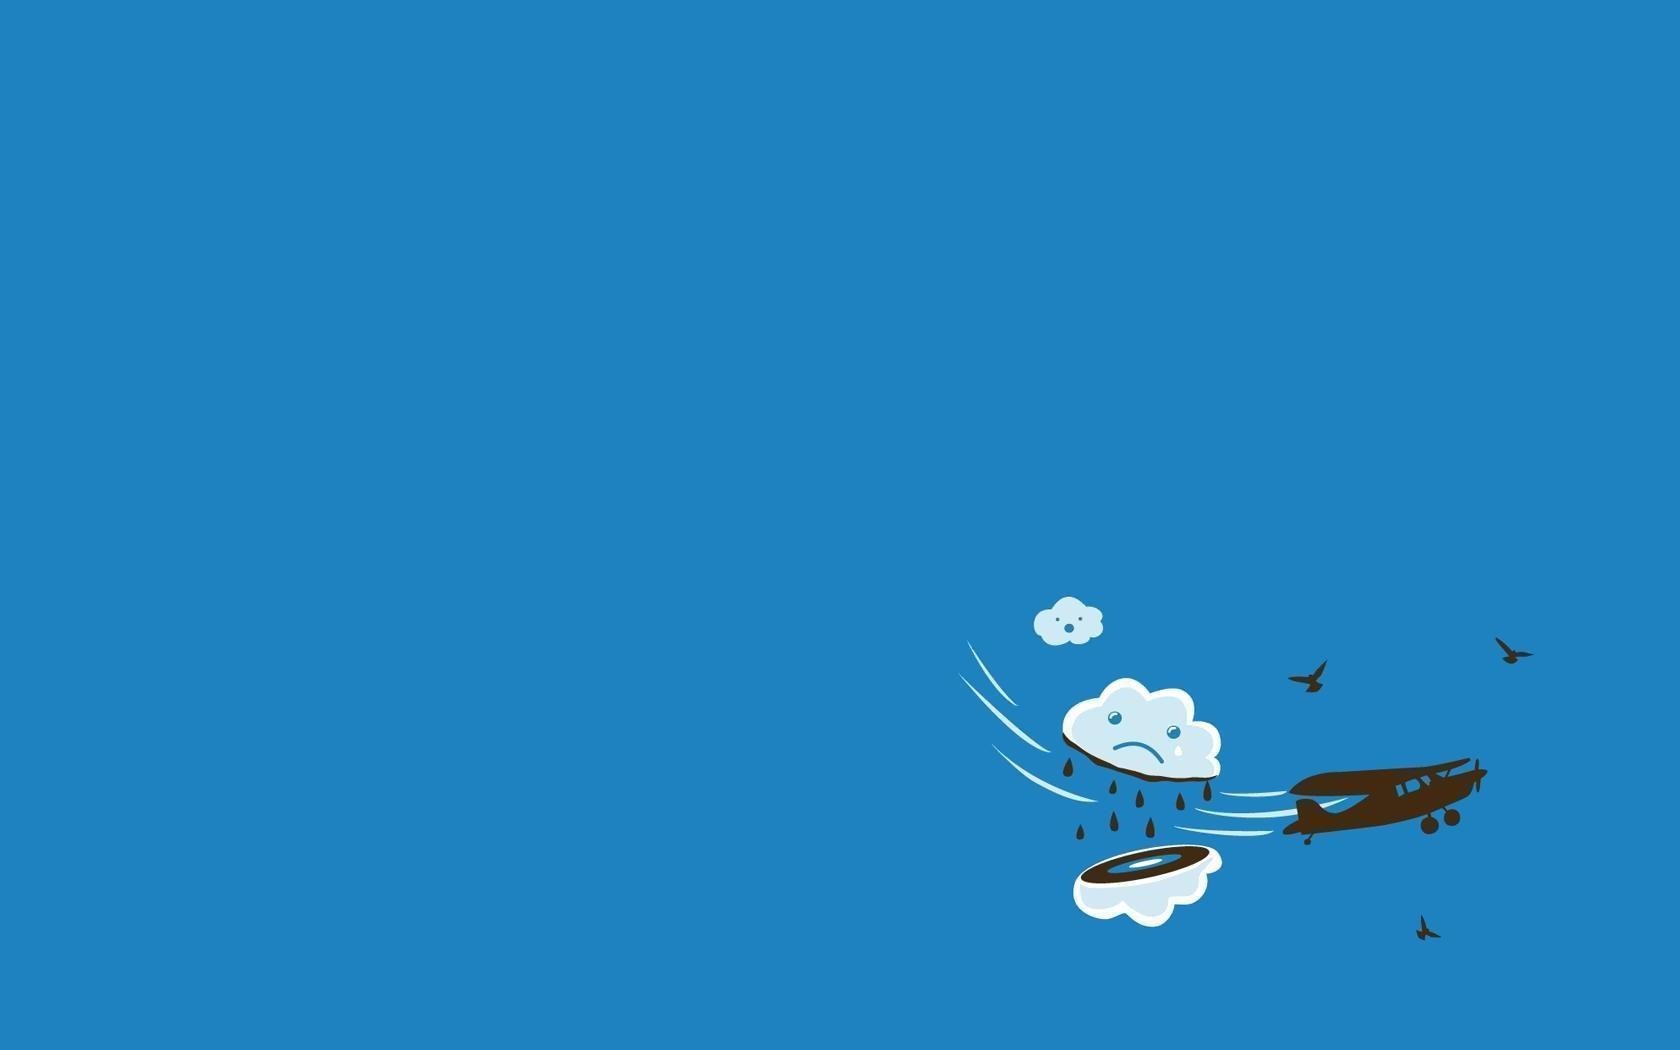 General 1680x1050 clouds minimalism humor aircraft vehicle sky artwork airplane simple background blue background